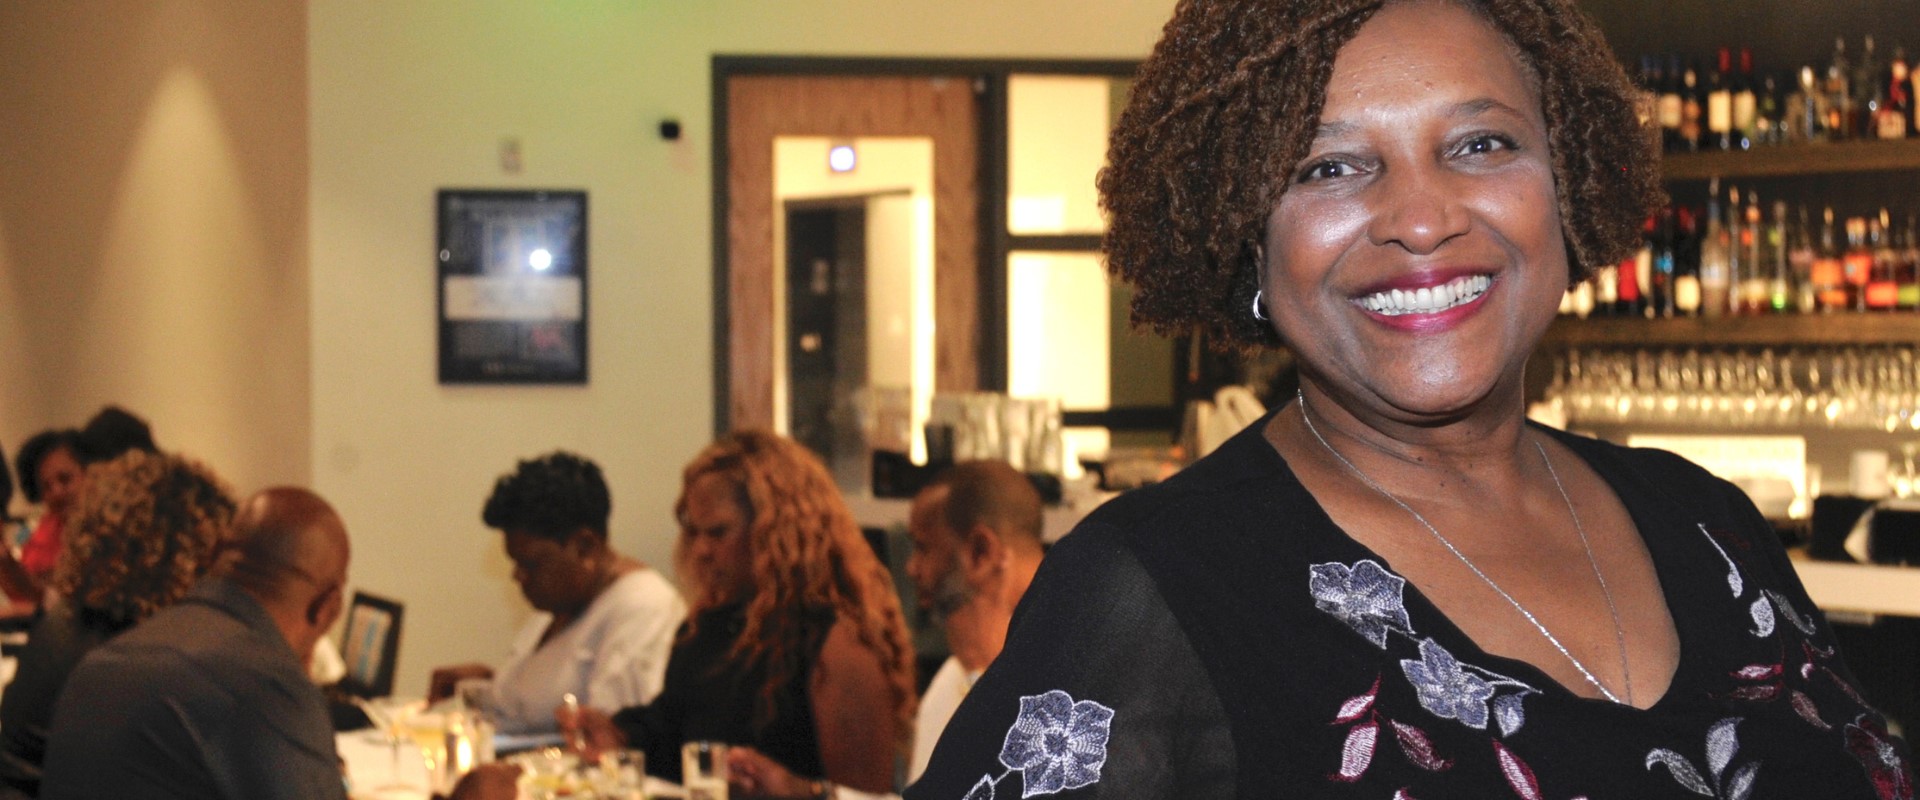 In Birmingham, this restauranteur cooks up family, community and fine dining